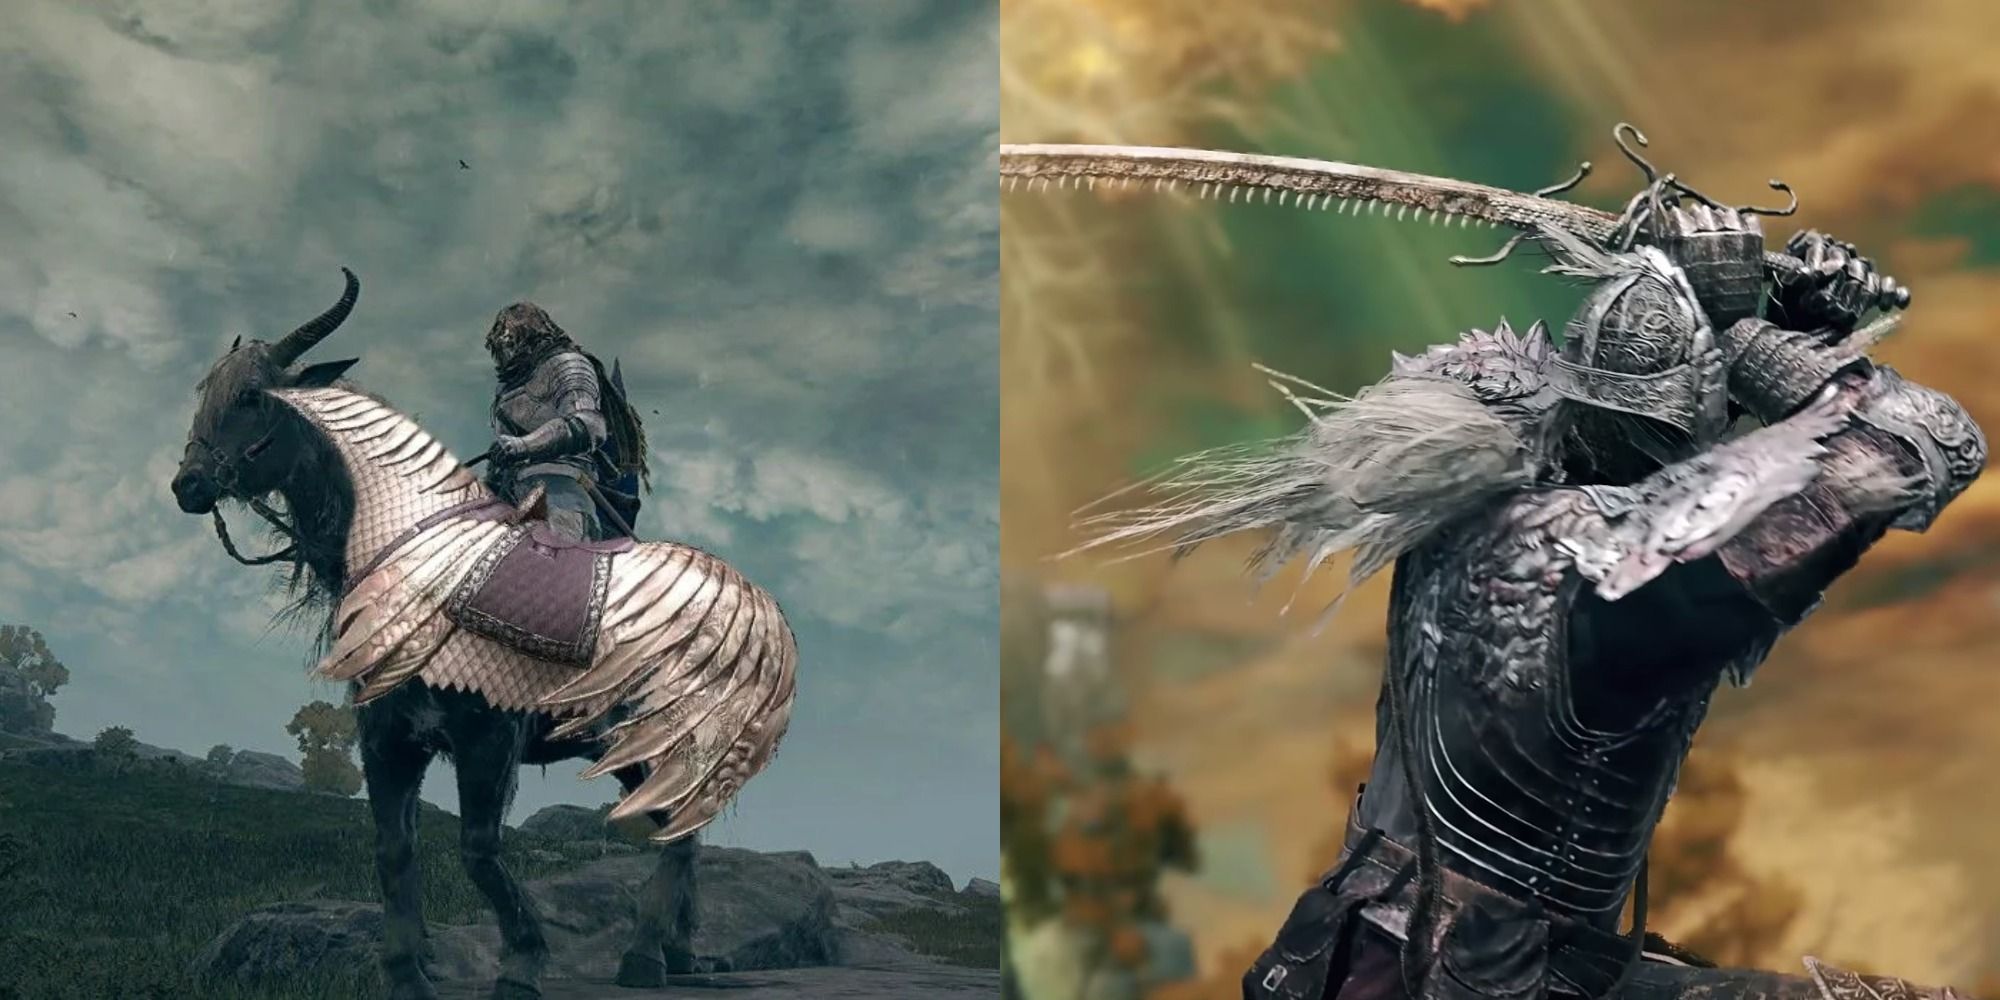 Split image showing the Torrent armor and a character wielding a weapon in Elden Ring.